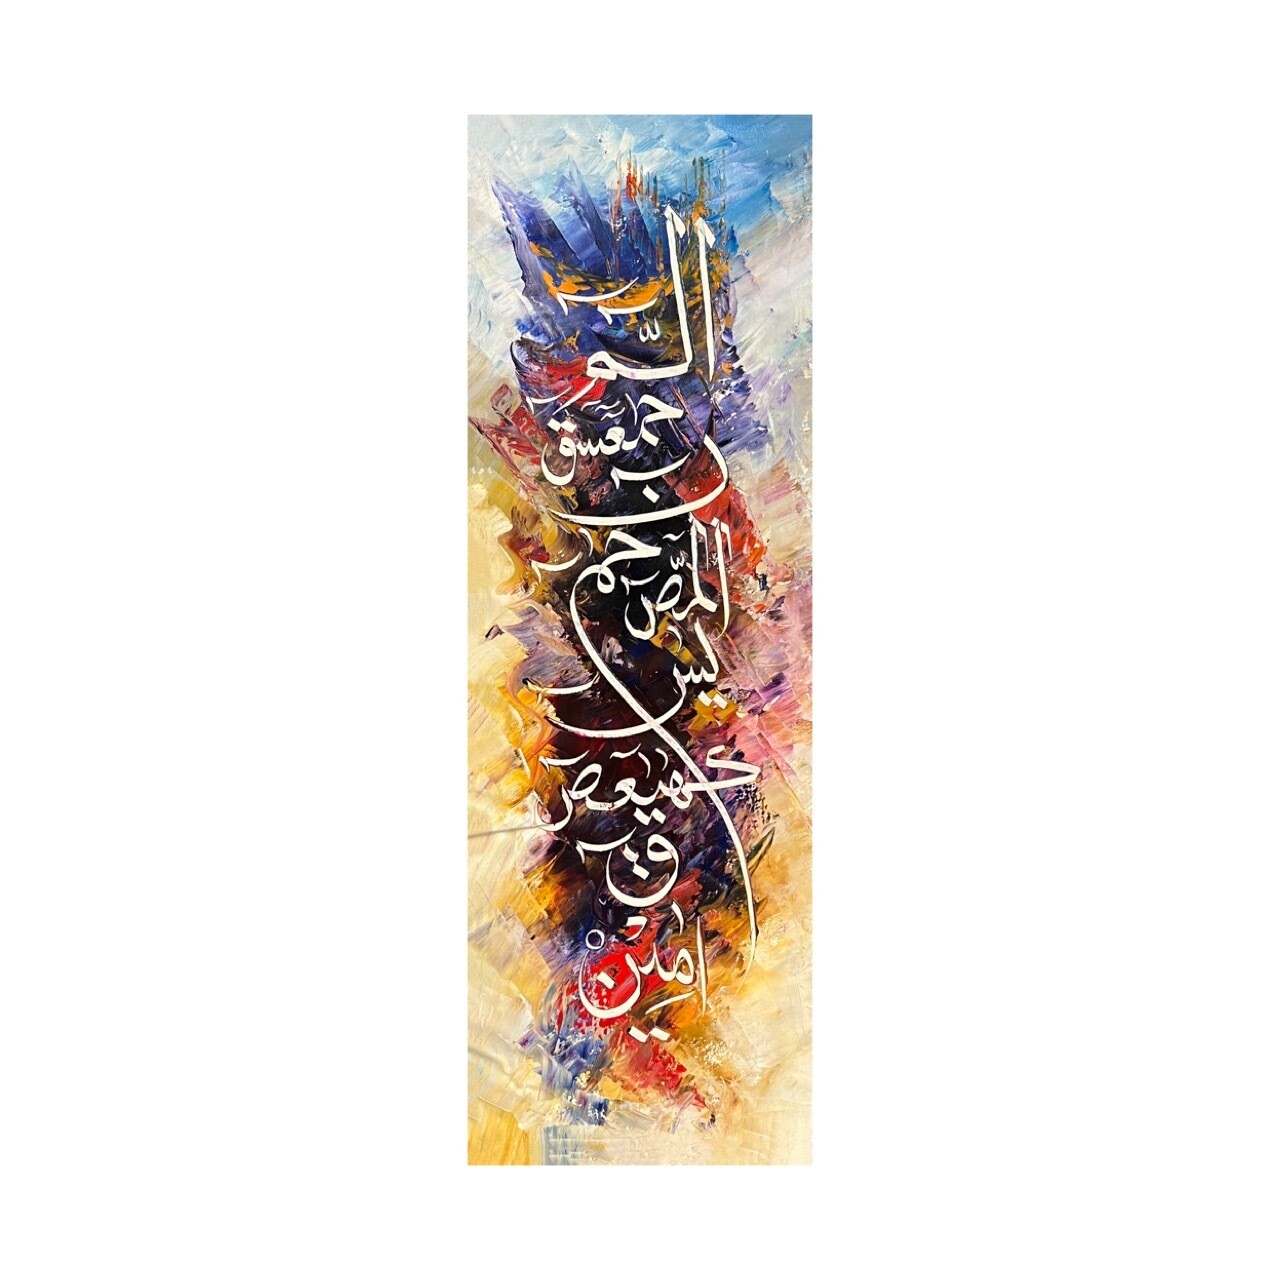 Loh E Qurani (Quranic phrases)- Original hand engraved knife calligraphy painting